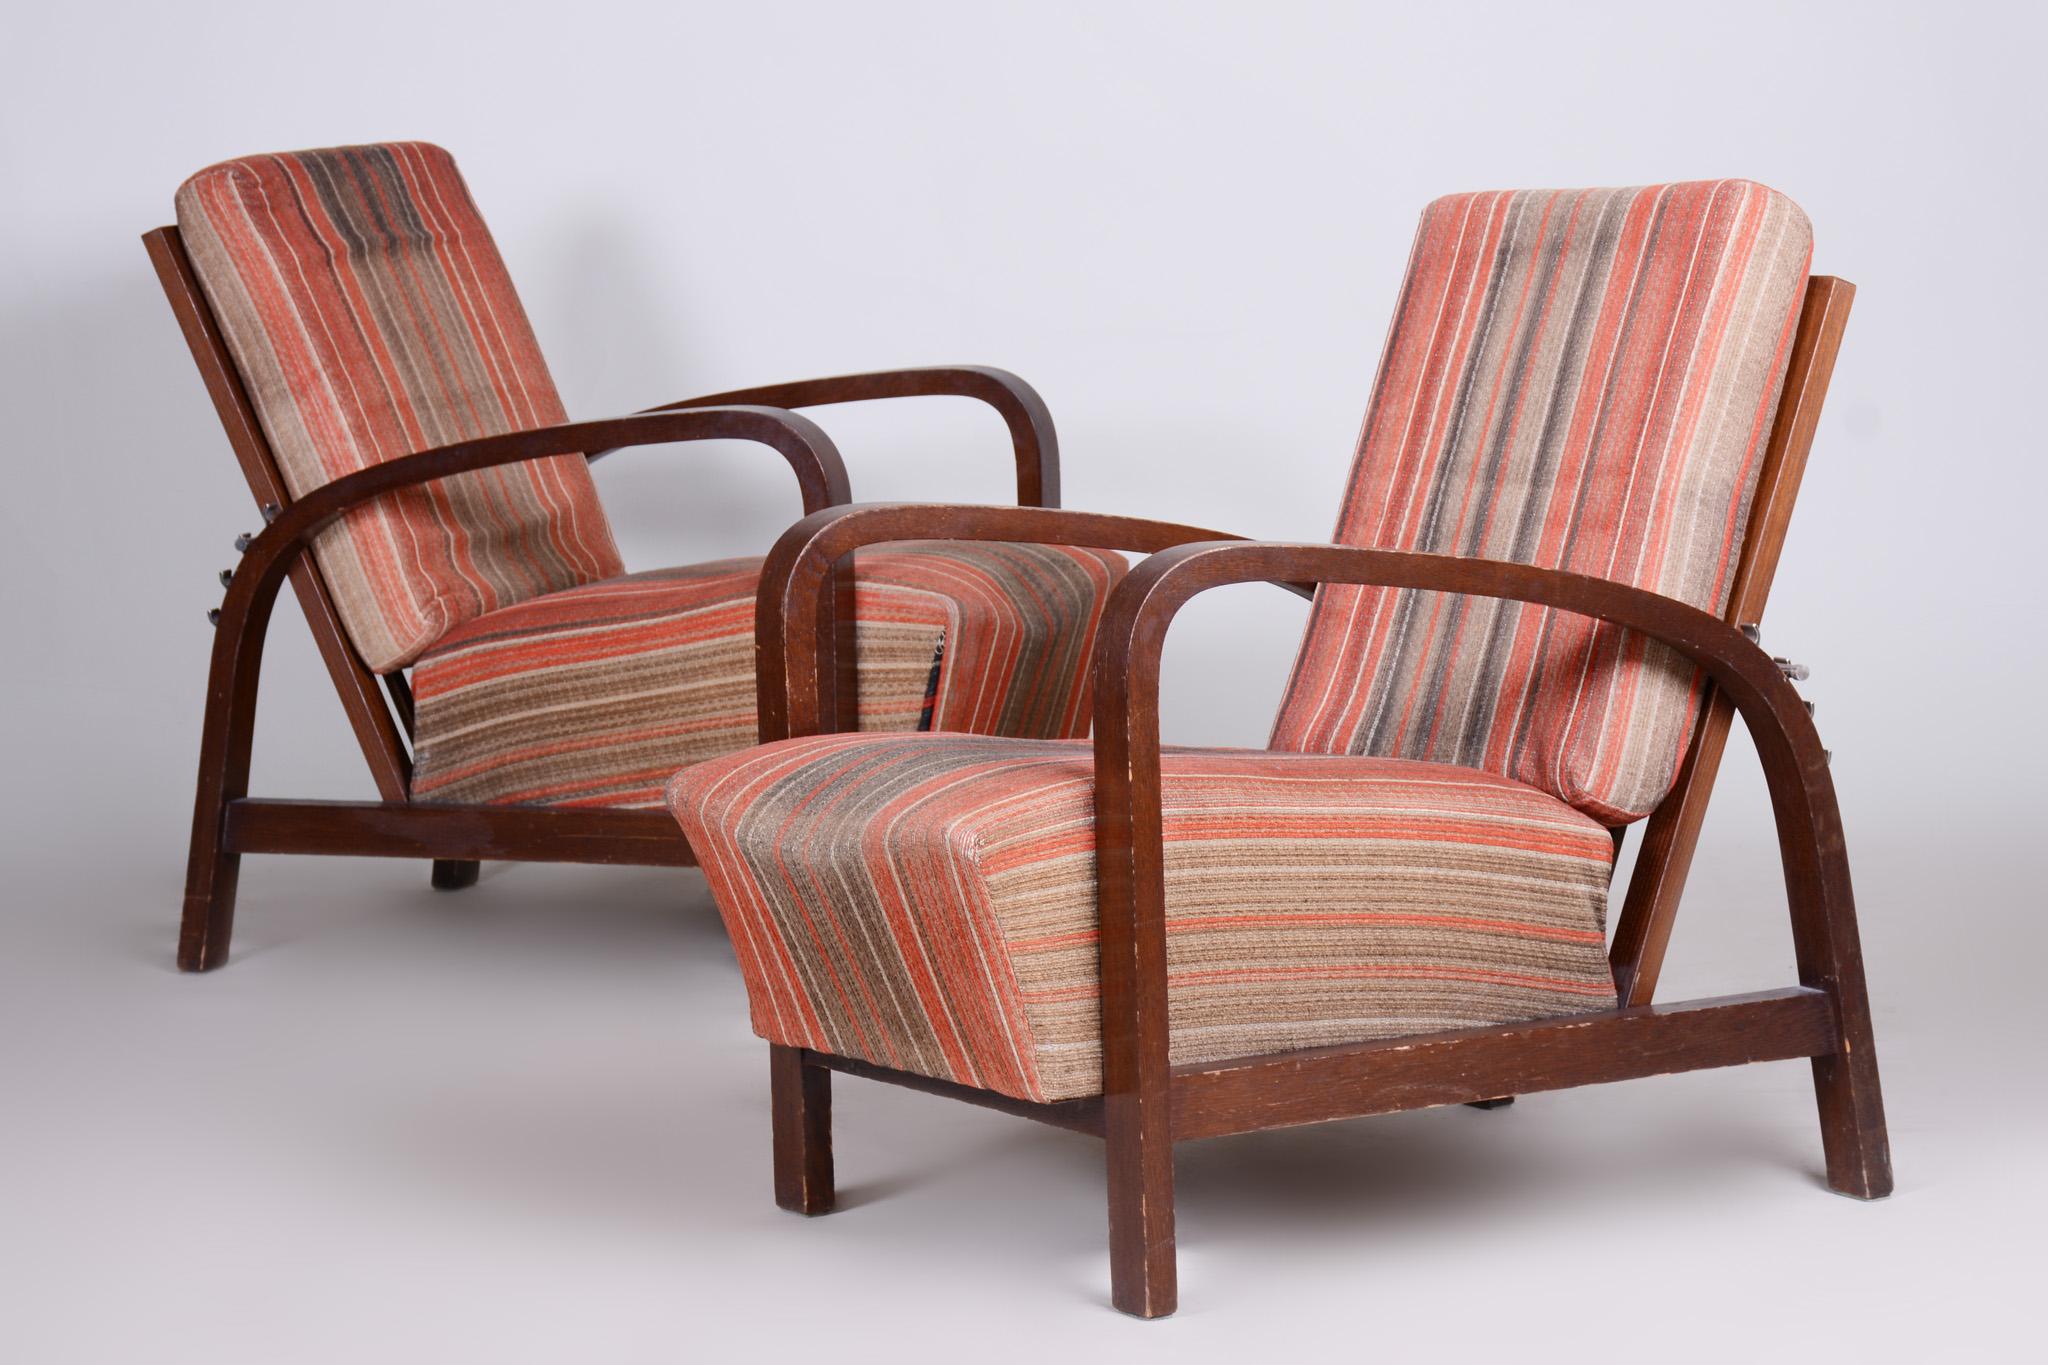 Czech Art Deco Oak Armchairs 1930s, Original Well Preserved Condition For Sale 3